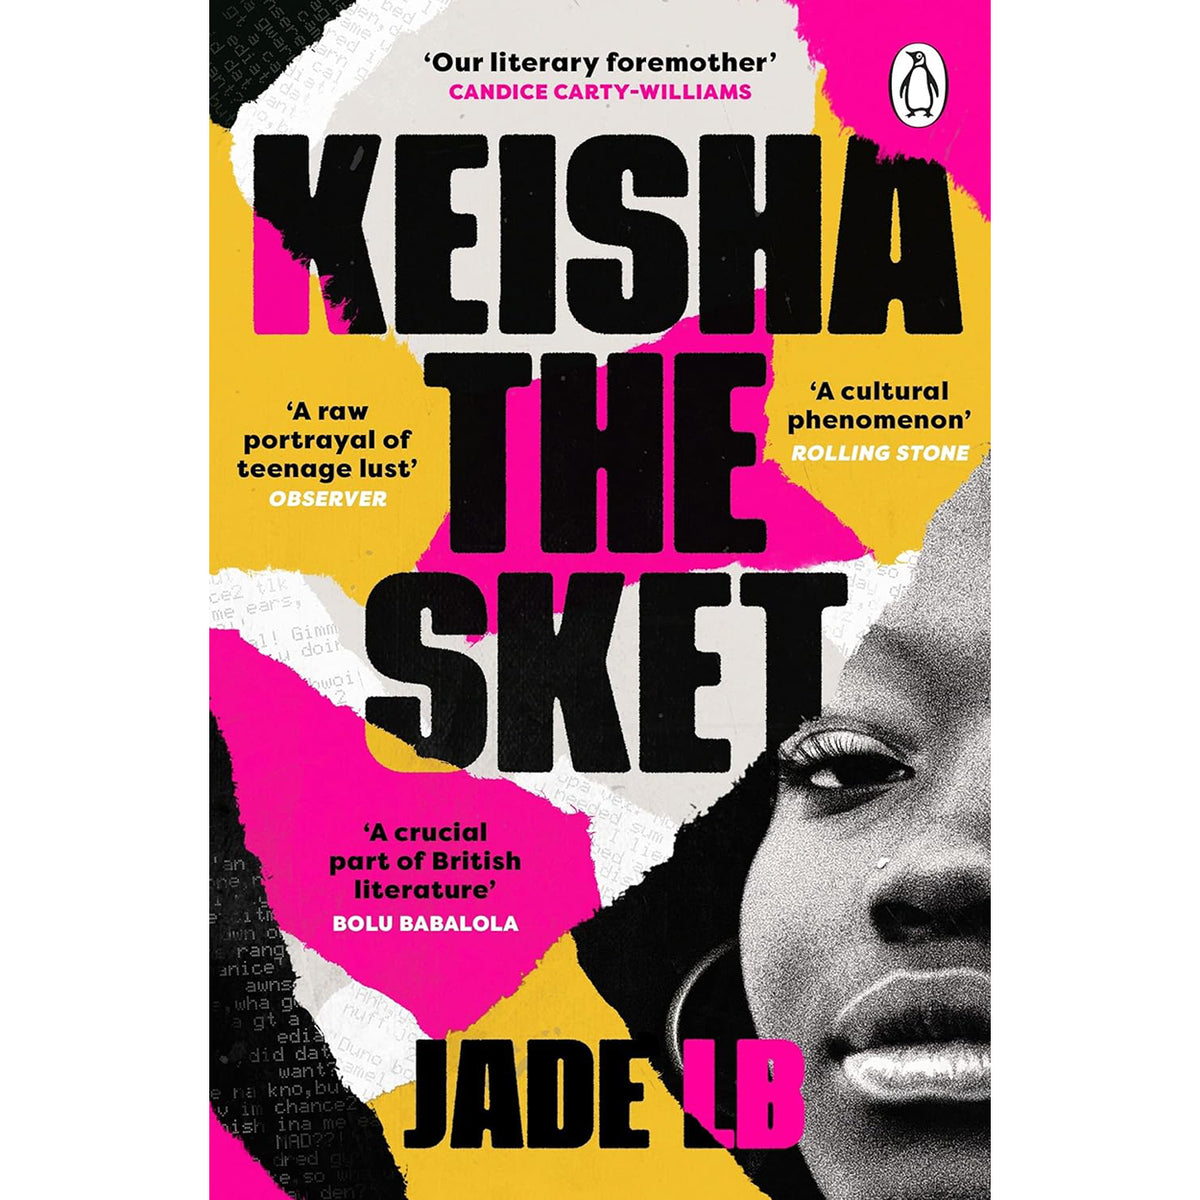 Keisha the Sket Front Cover (Paperback)